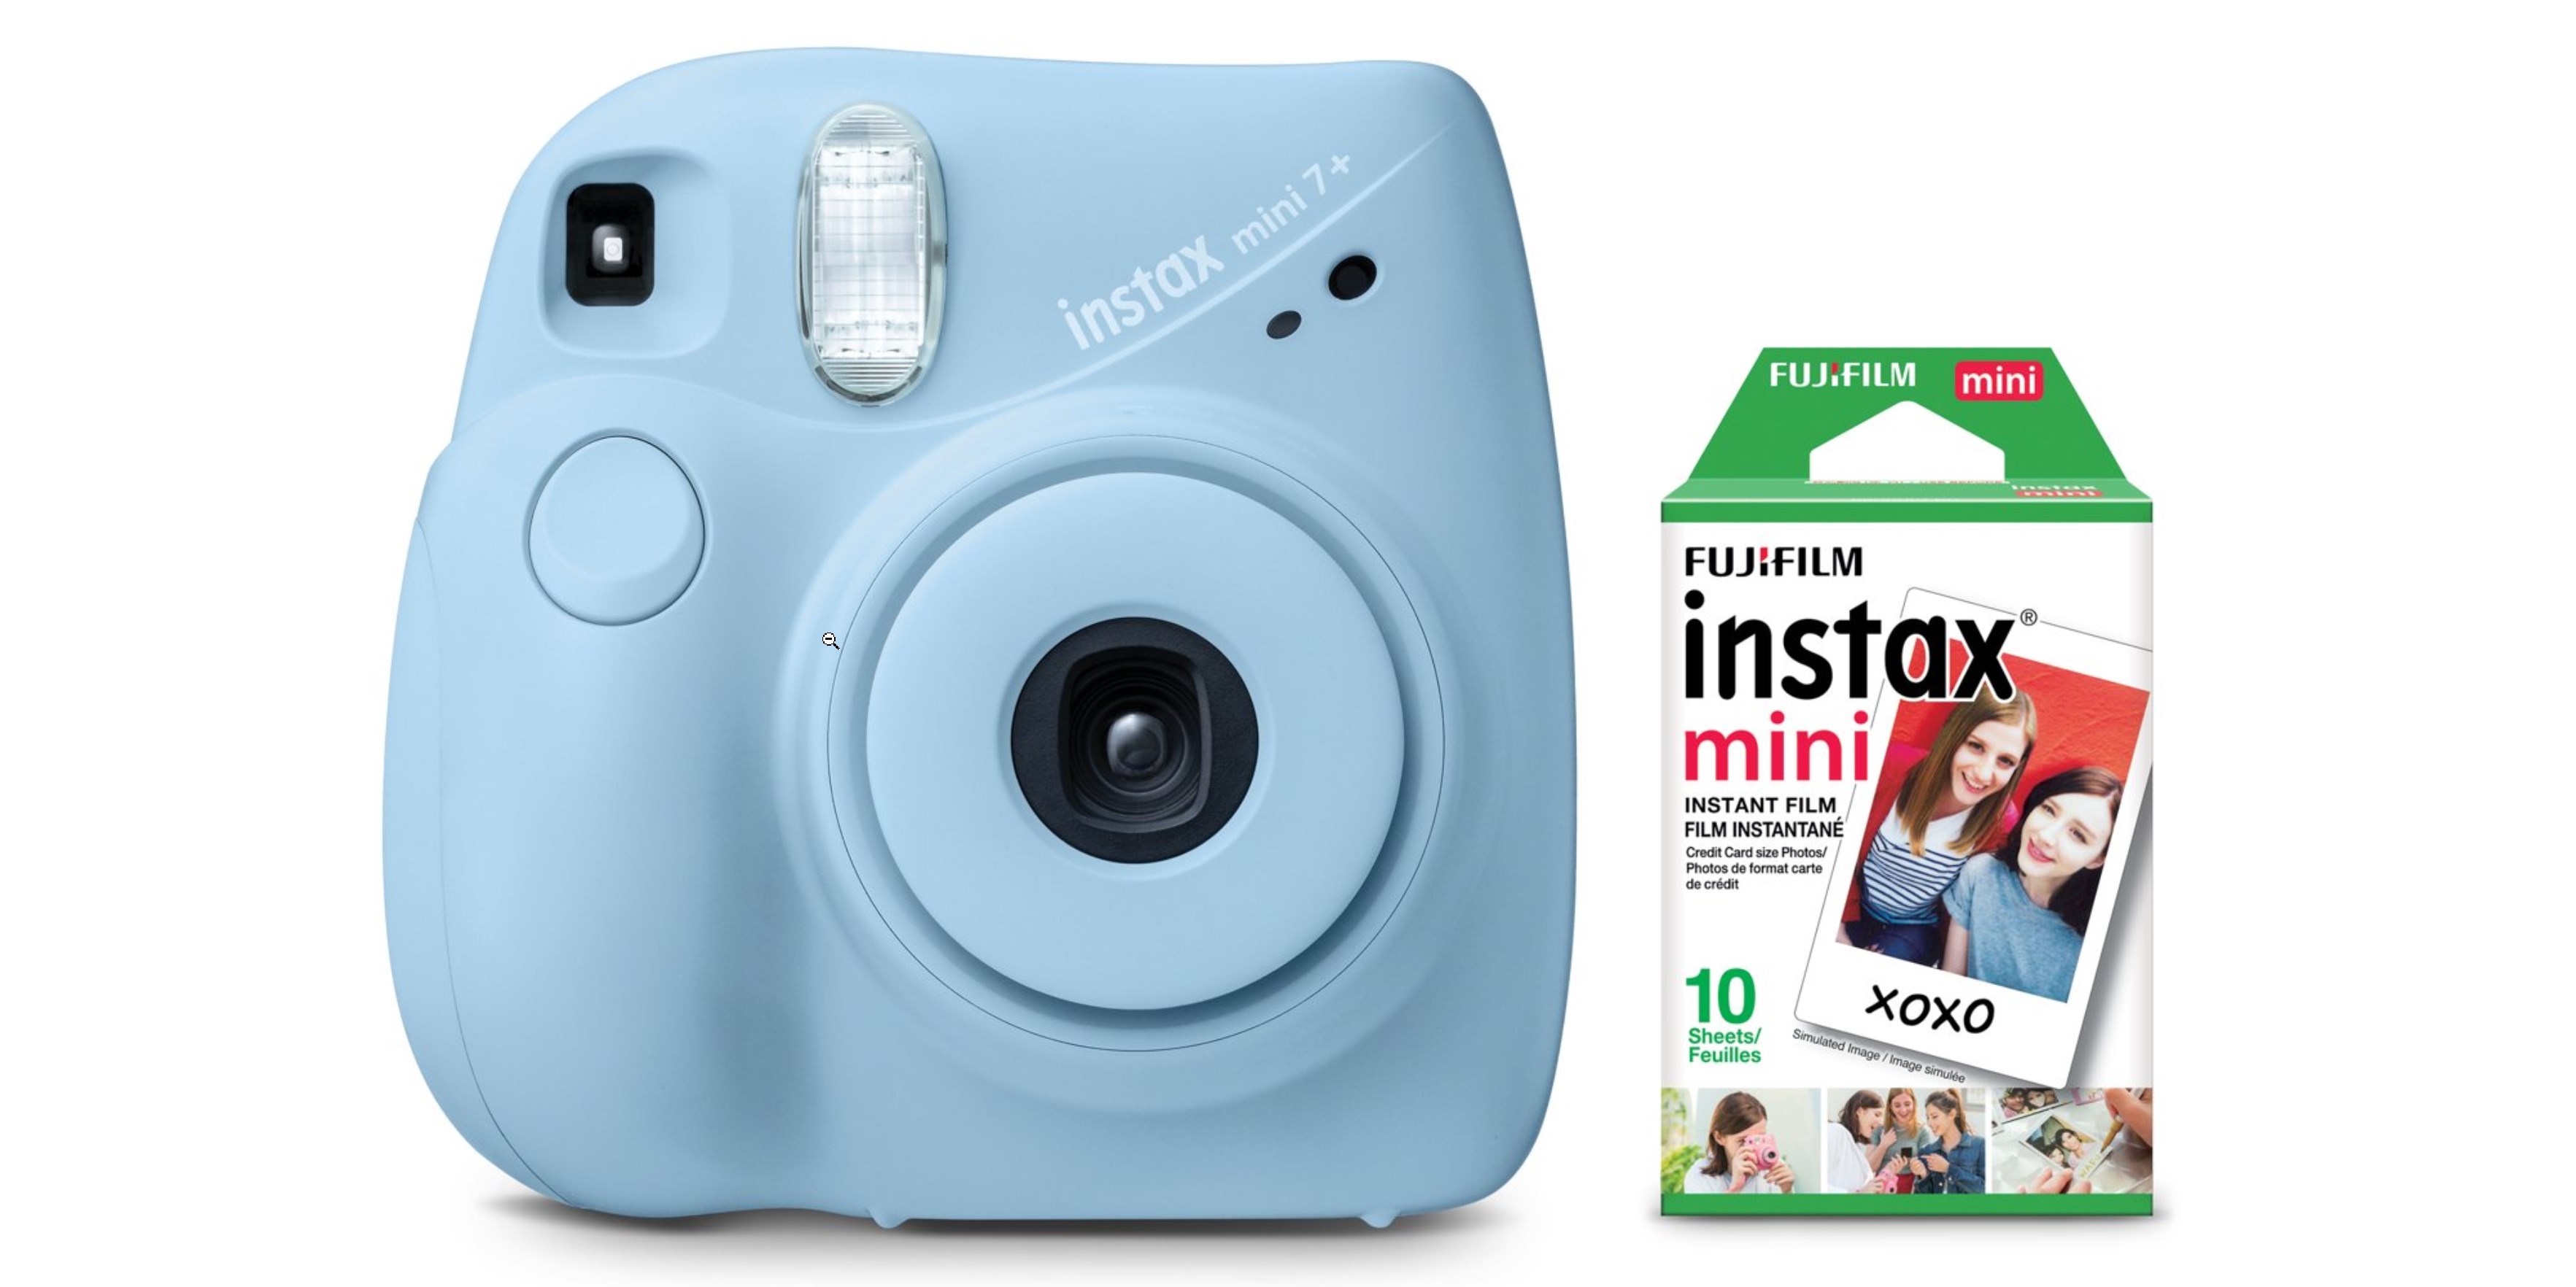 levering aan huis leer kwaad This Polaroid-style Fujifilm instant camera is $49 for Cyber Monday |  Digital Trends